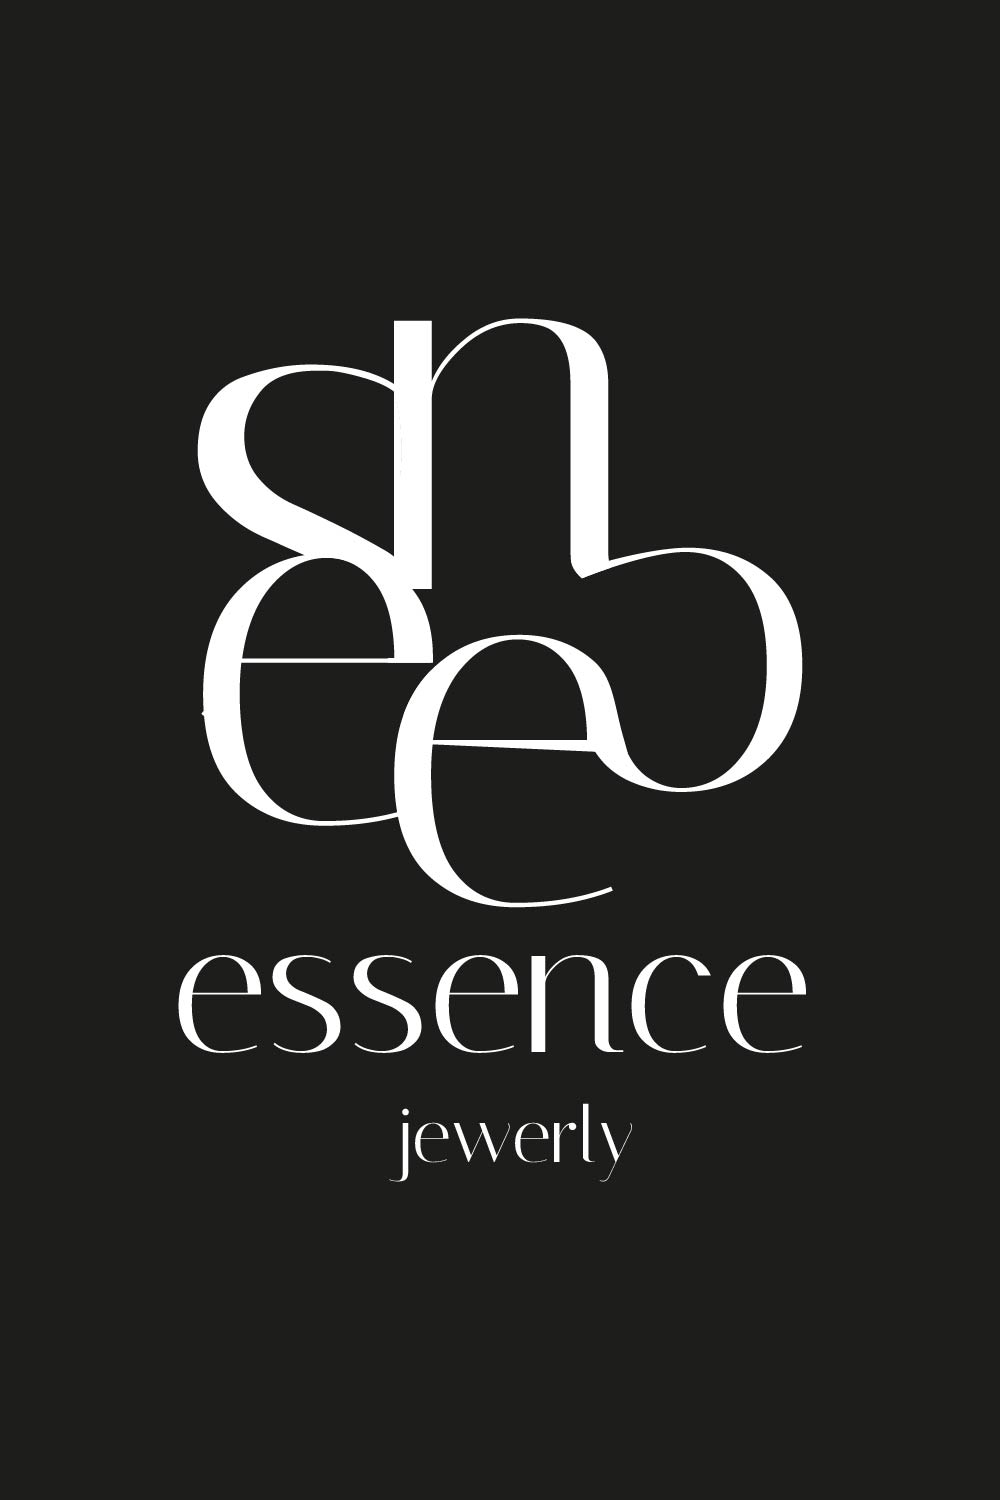 Essence jewerly logo pinterest preview image.